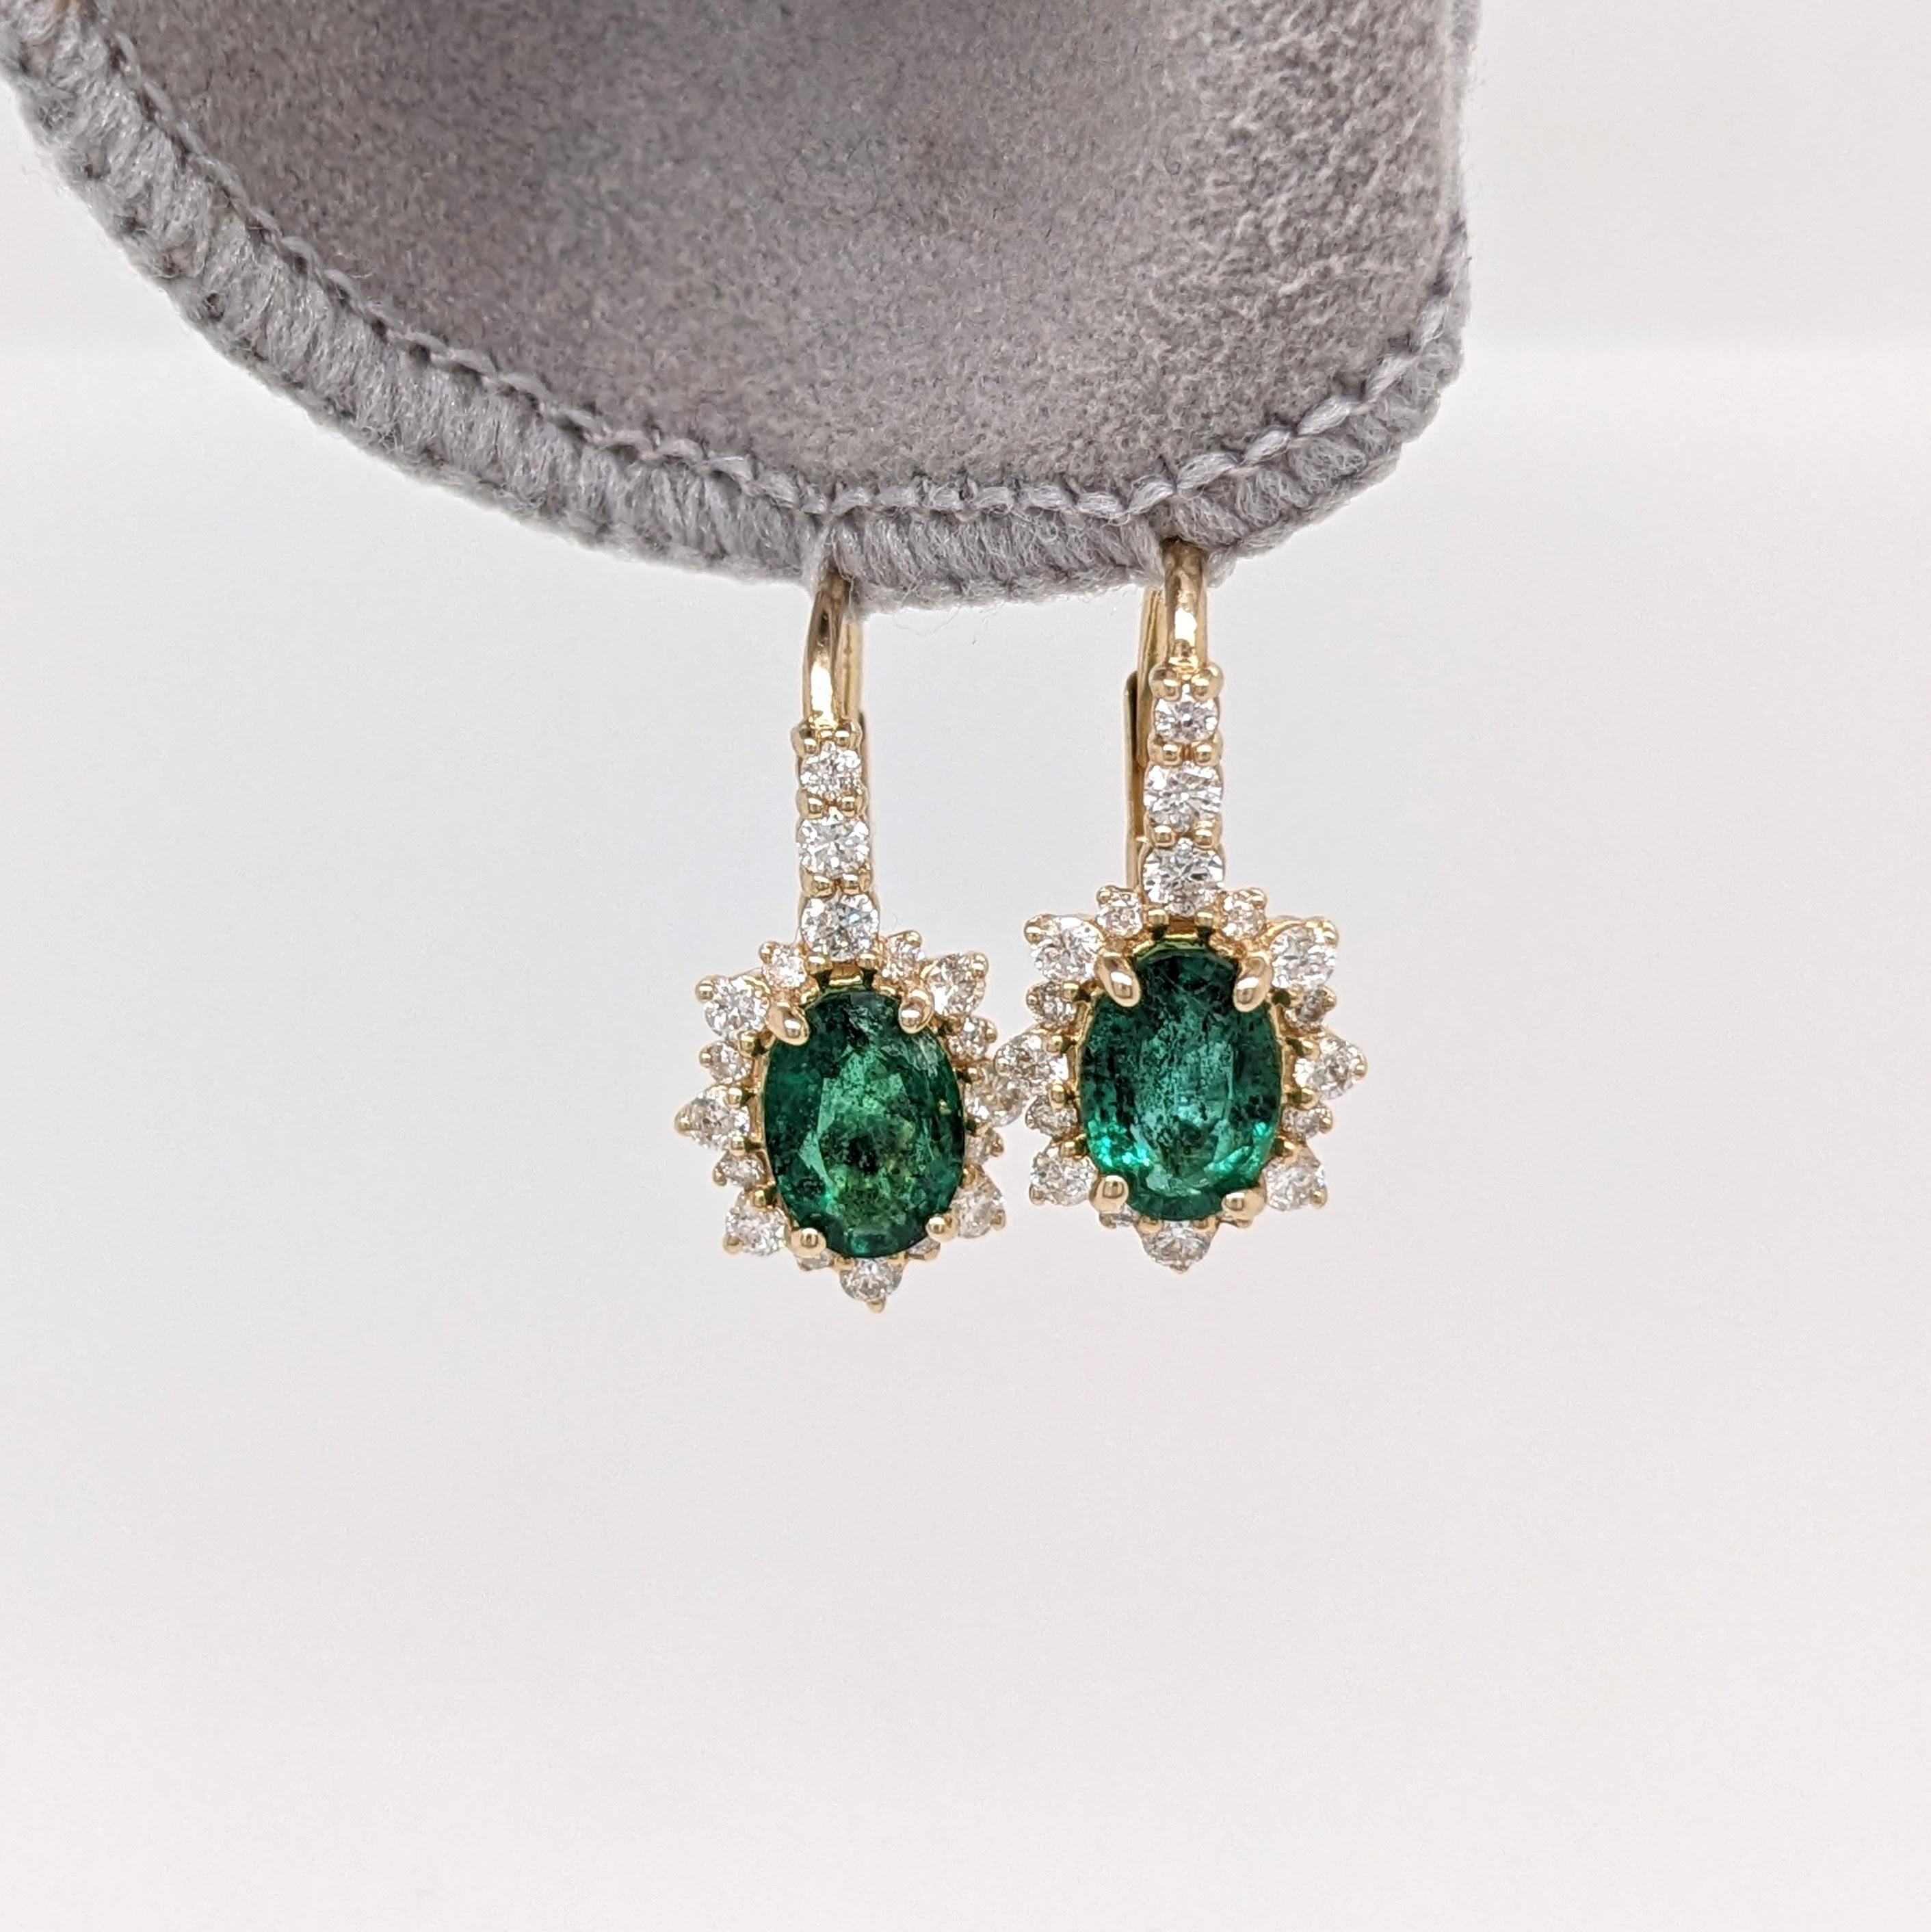 These beautiful pair of drop earrings feature 2.25 carat weight oval emerald gemstones with a halo of natural earth mined diamonds and a diamond studded bail, all set in solid 14K gold. These earrings can be a beautiful birthstone gift for your